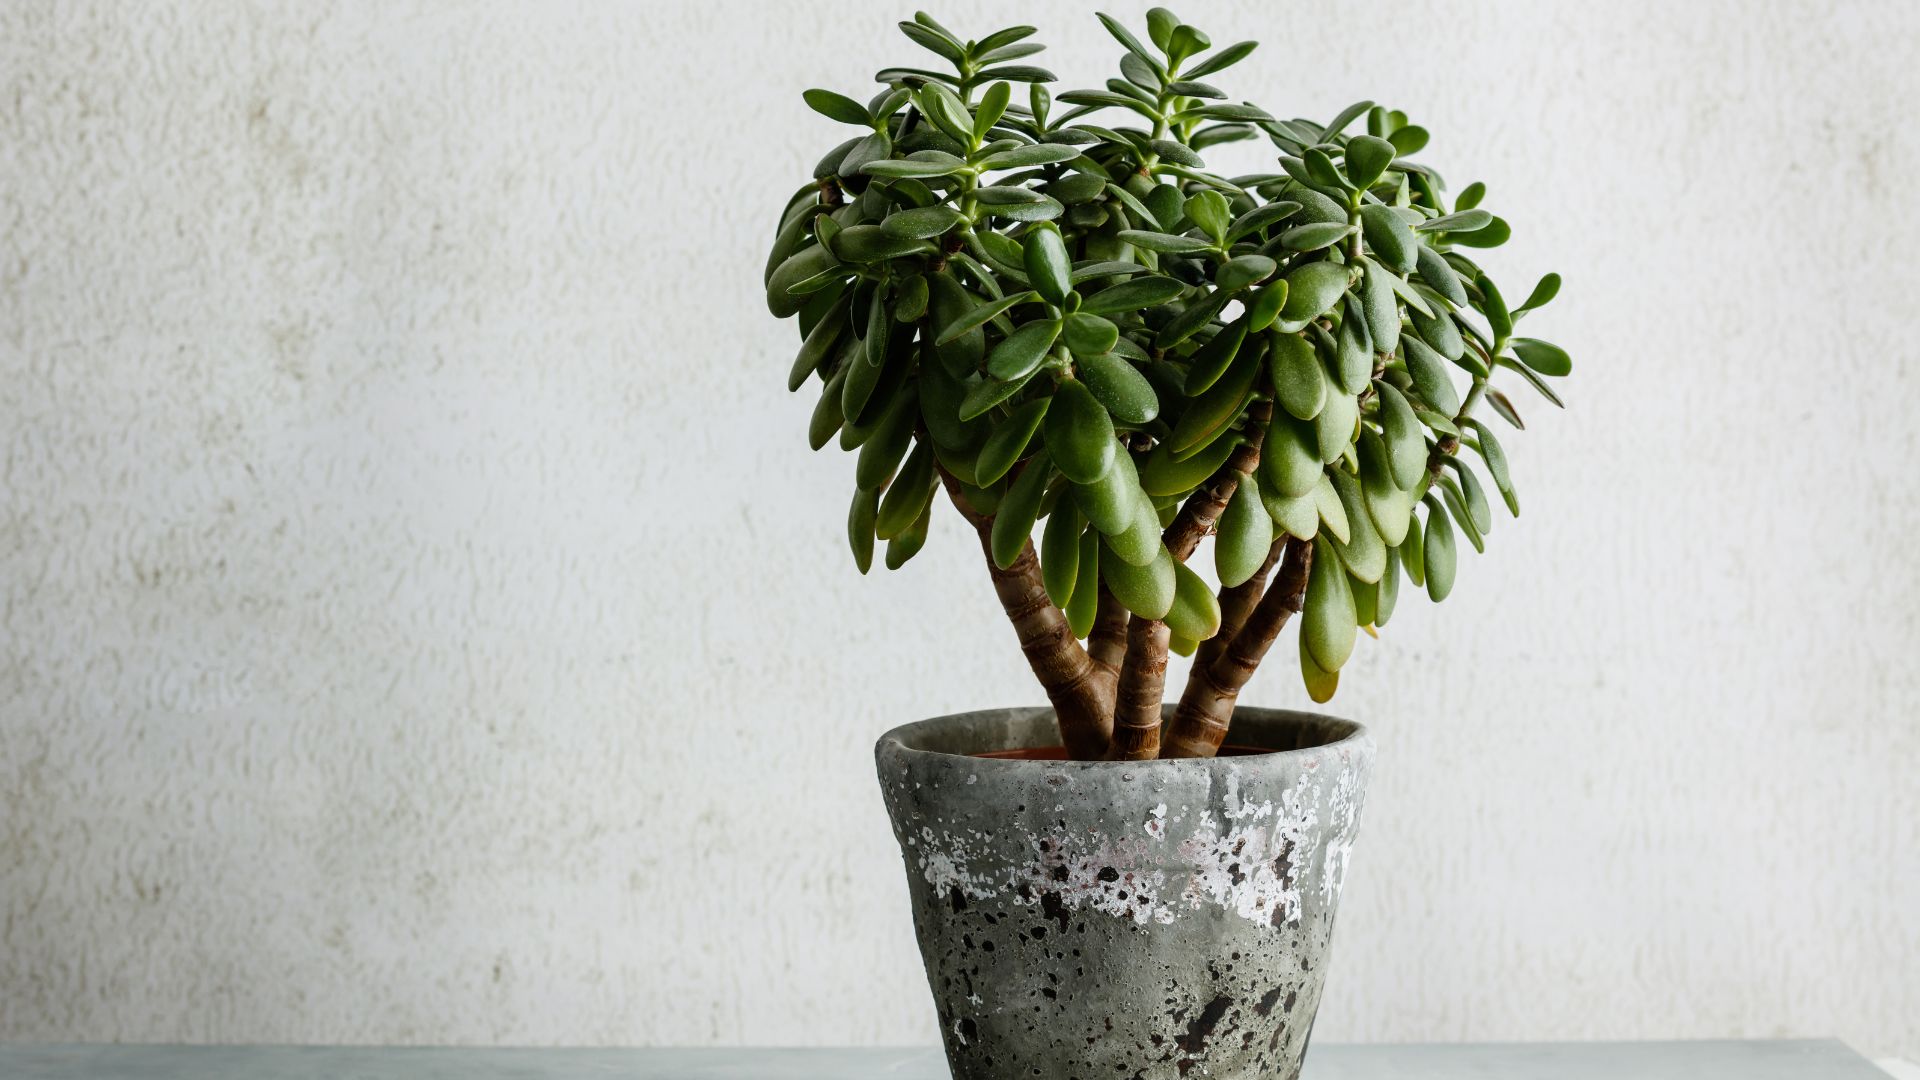 Grow Your Own Indoor Green Fortune By Effortlessly Propagating The Money Tree Plant